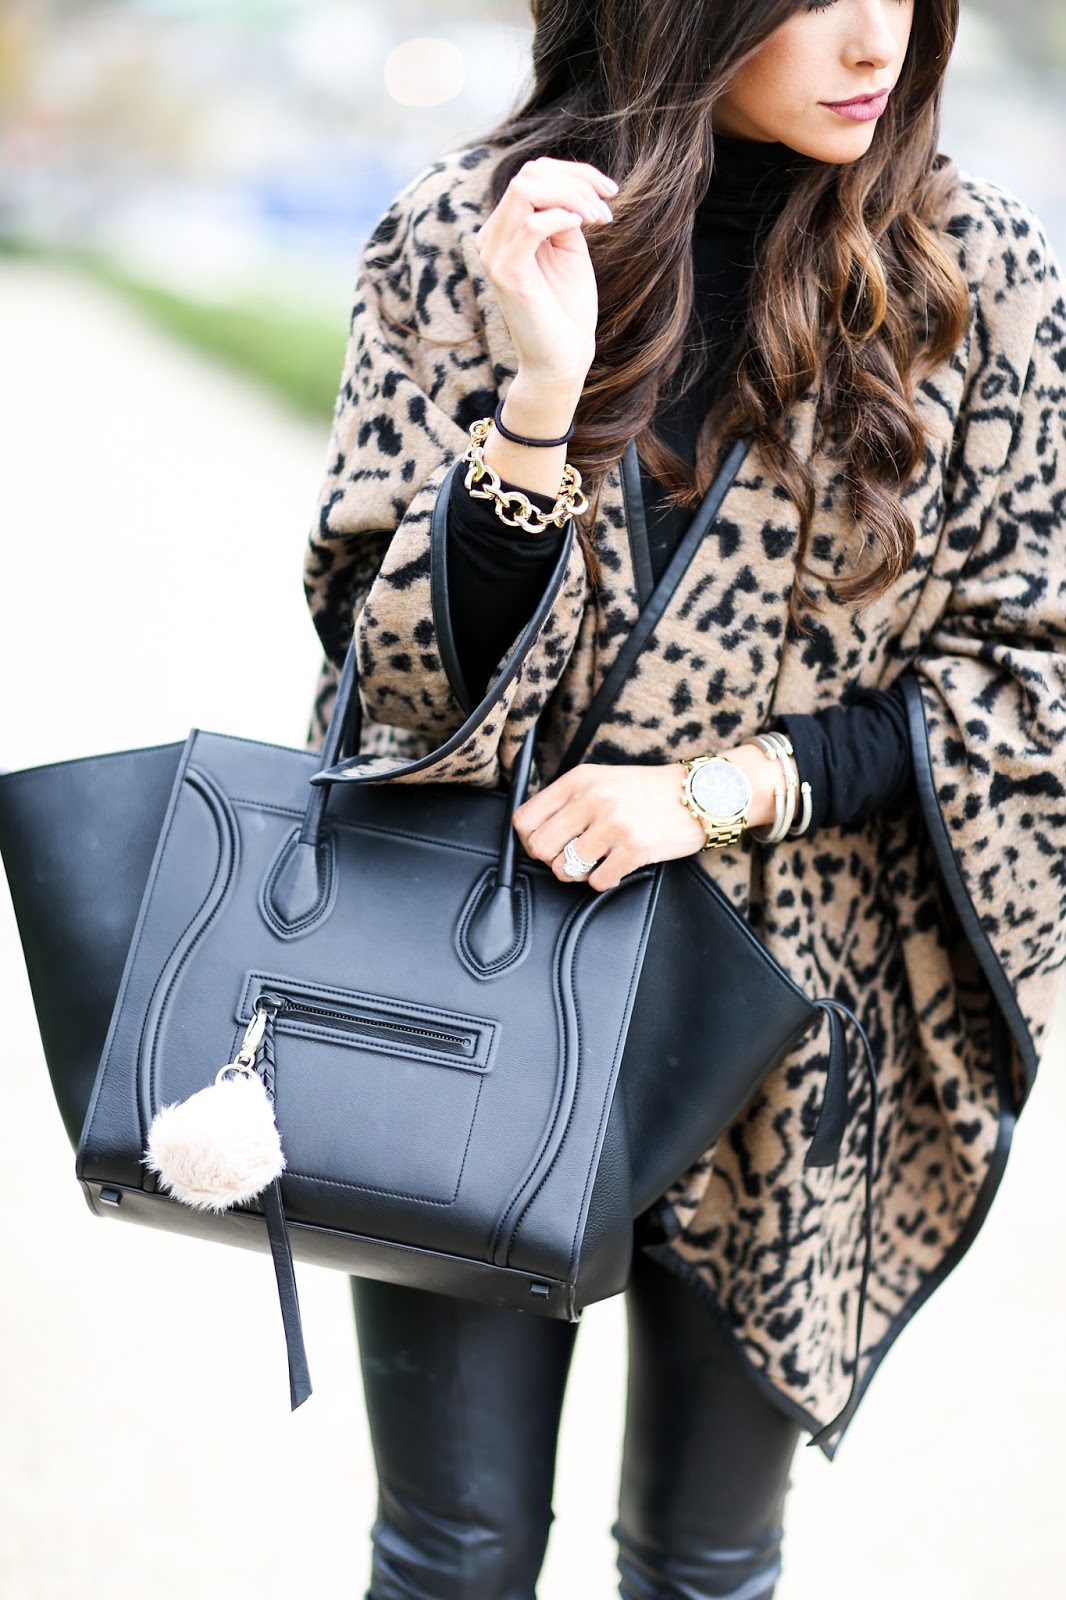 Leopard Print Poncho in Paris | The Sweetest Thing | Bloglovin’